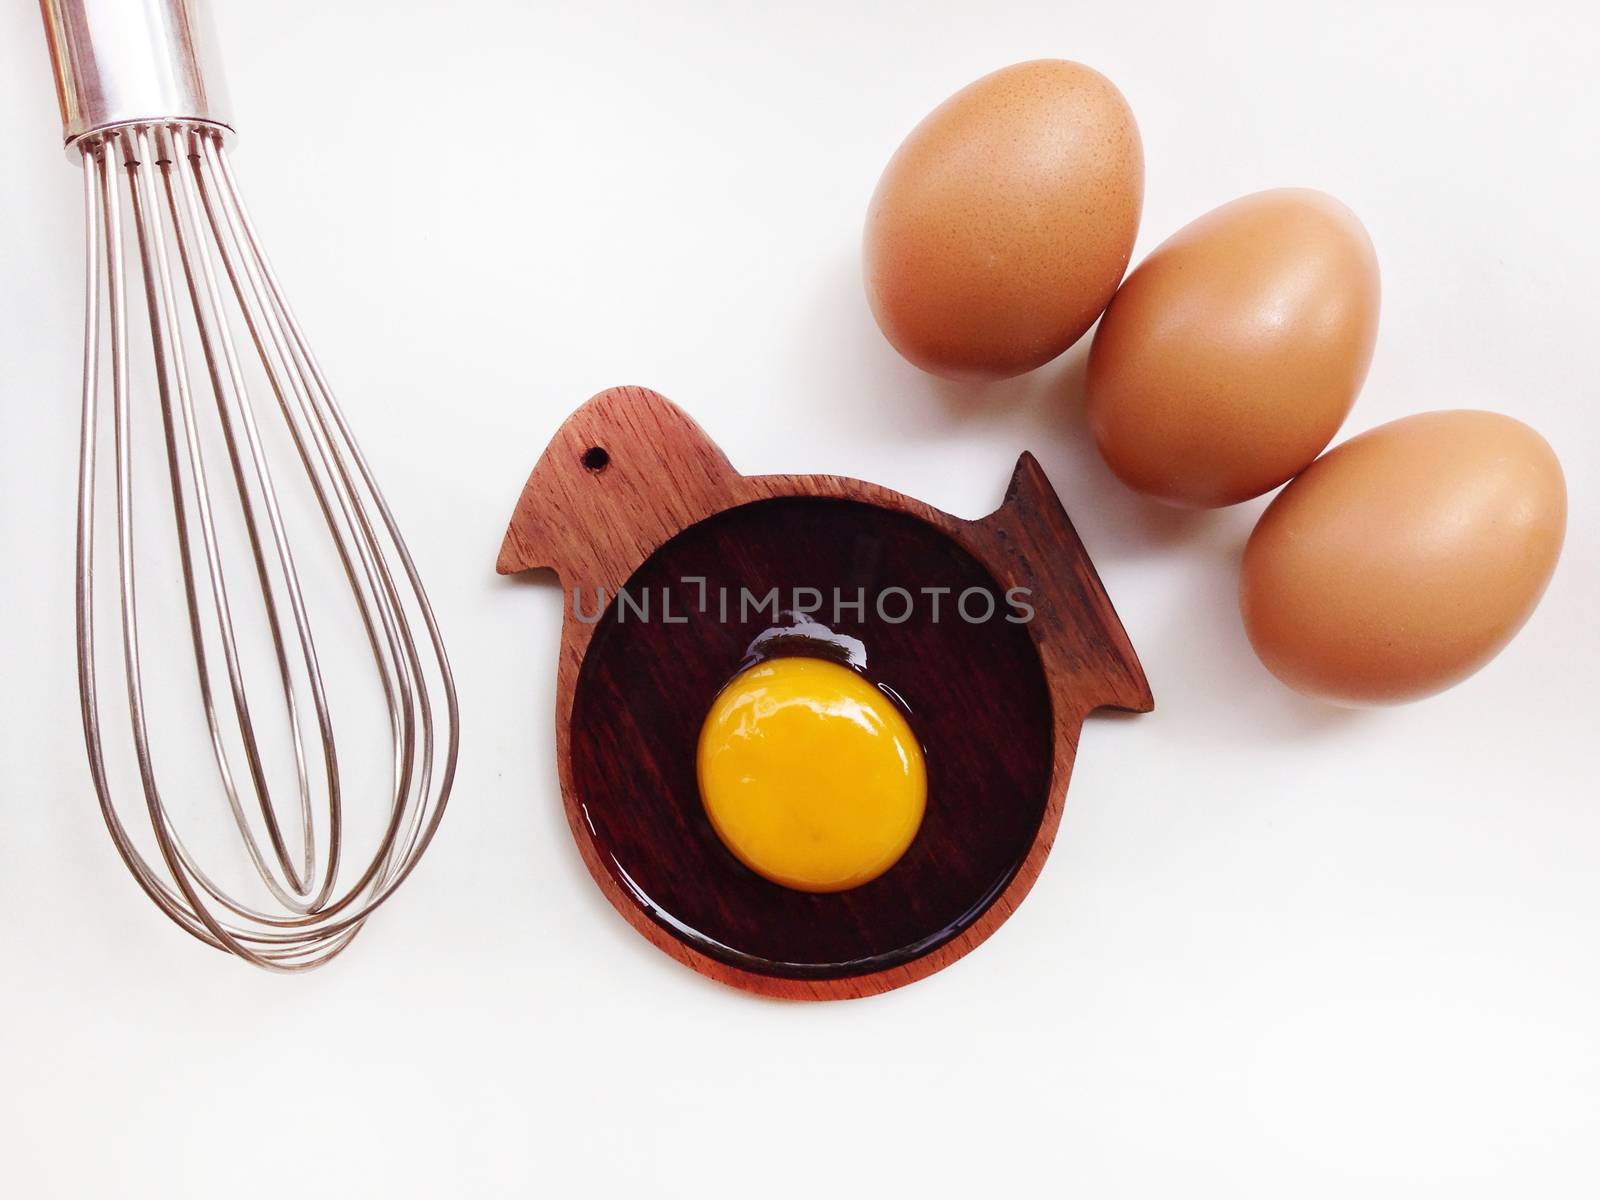 Egg yolk on wooden bird shaped saucer with eggs and egg whisk on by Bowonpat